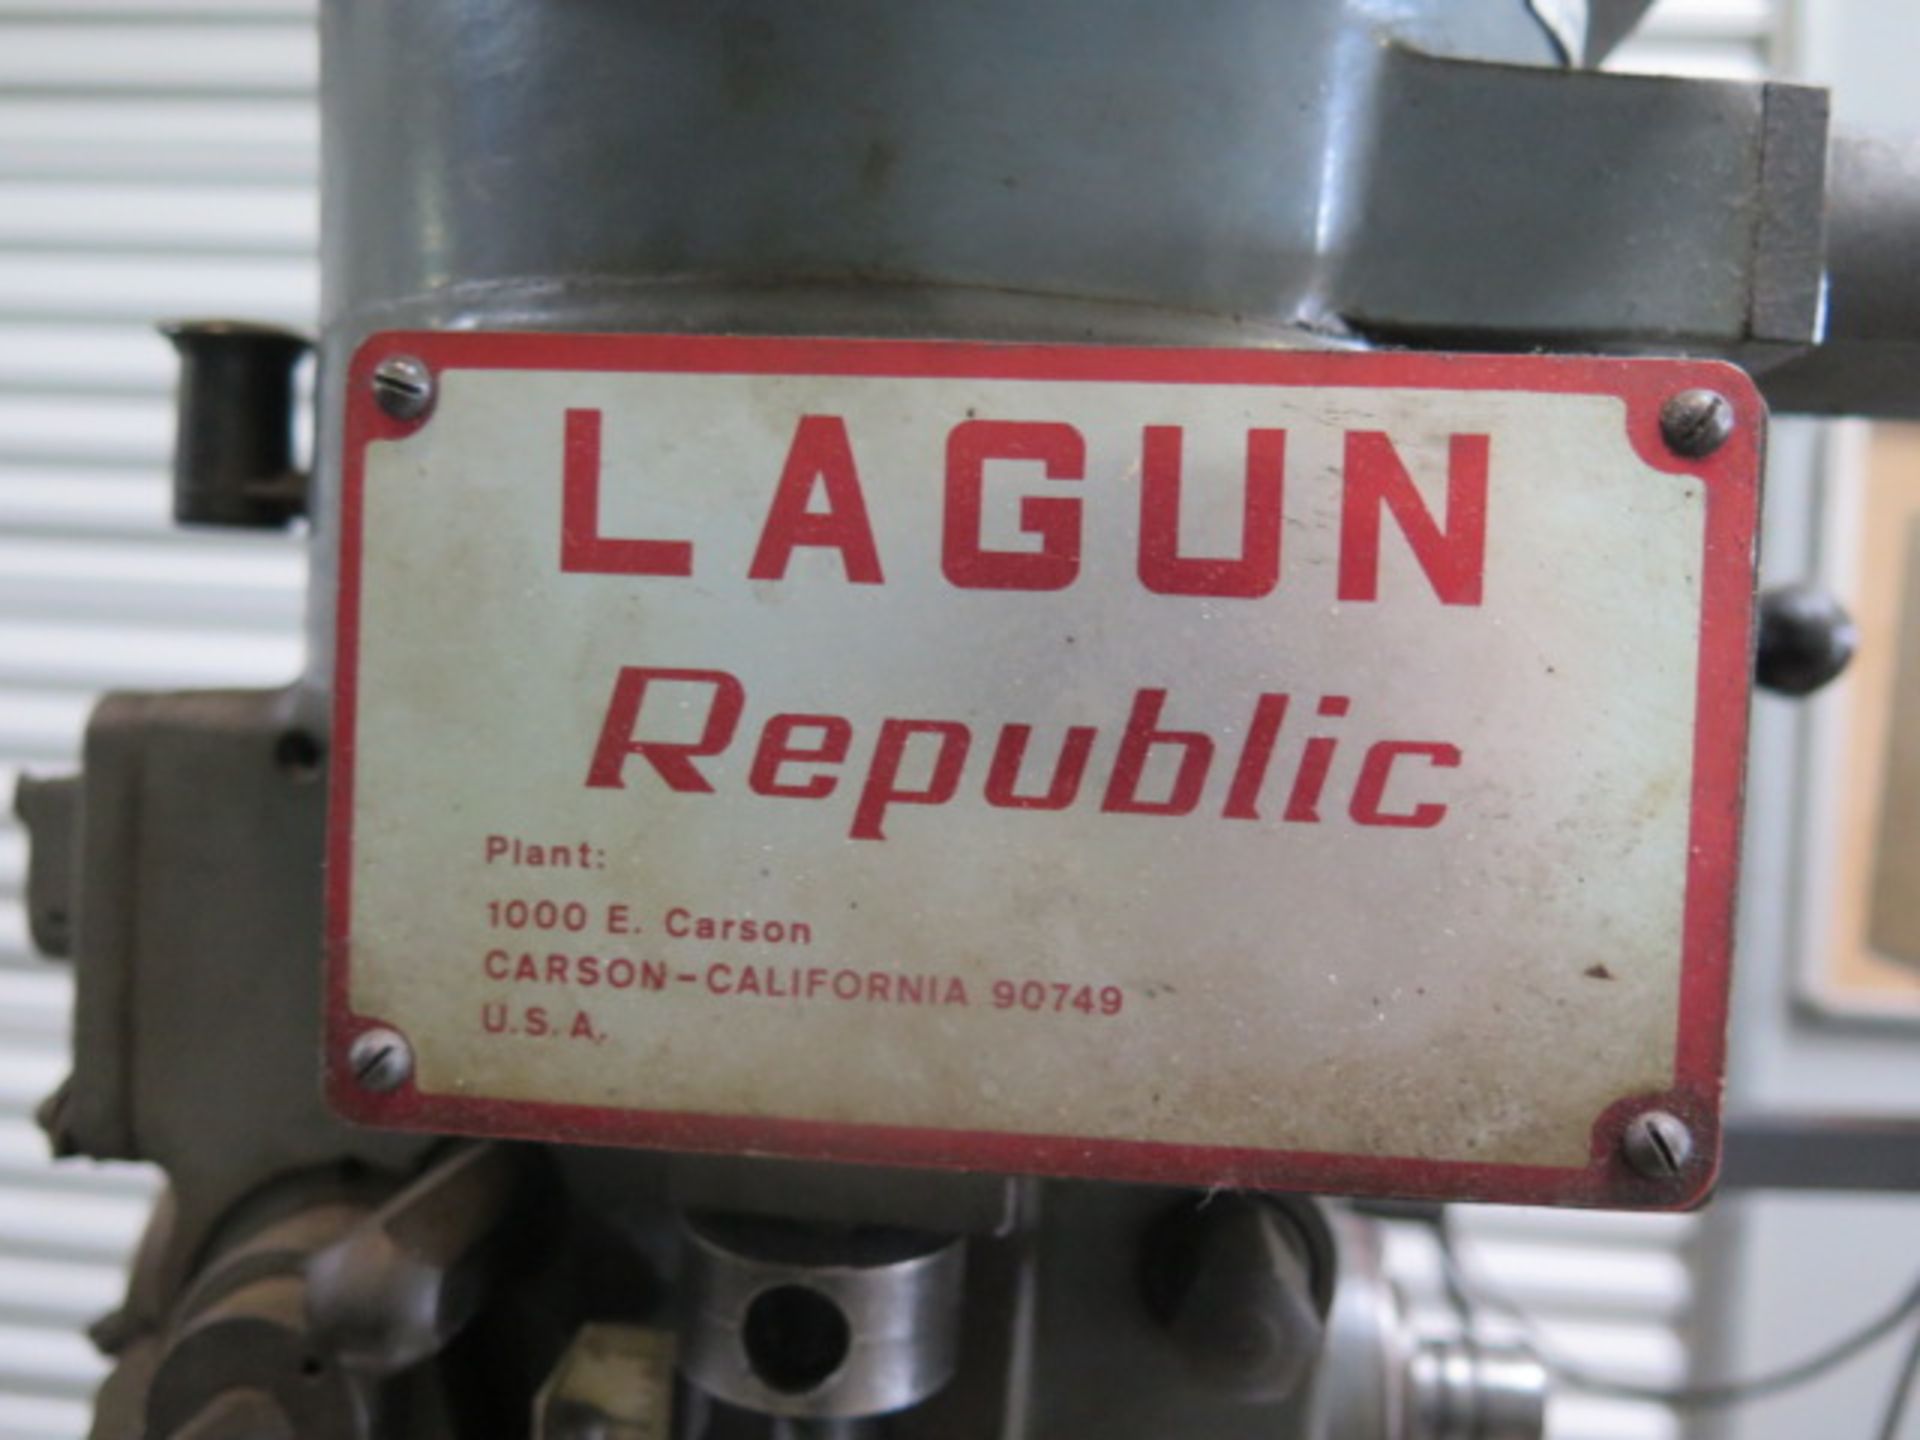 Lagun FT-1 Vertical Mill w/ Anilam Wizard DRO, 55-2940 RPM, 8-Speeds, 9” x 42” Table SOLD AS-IS - Image 9 of 9